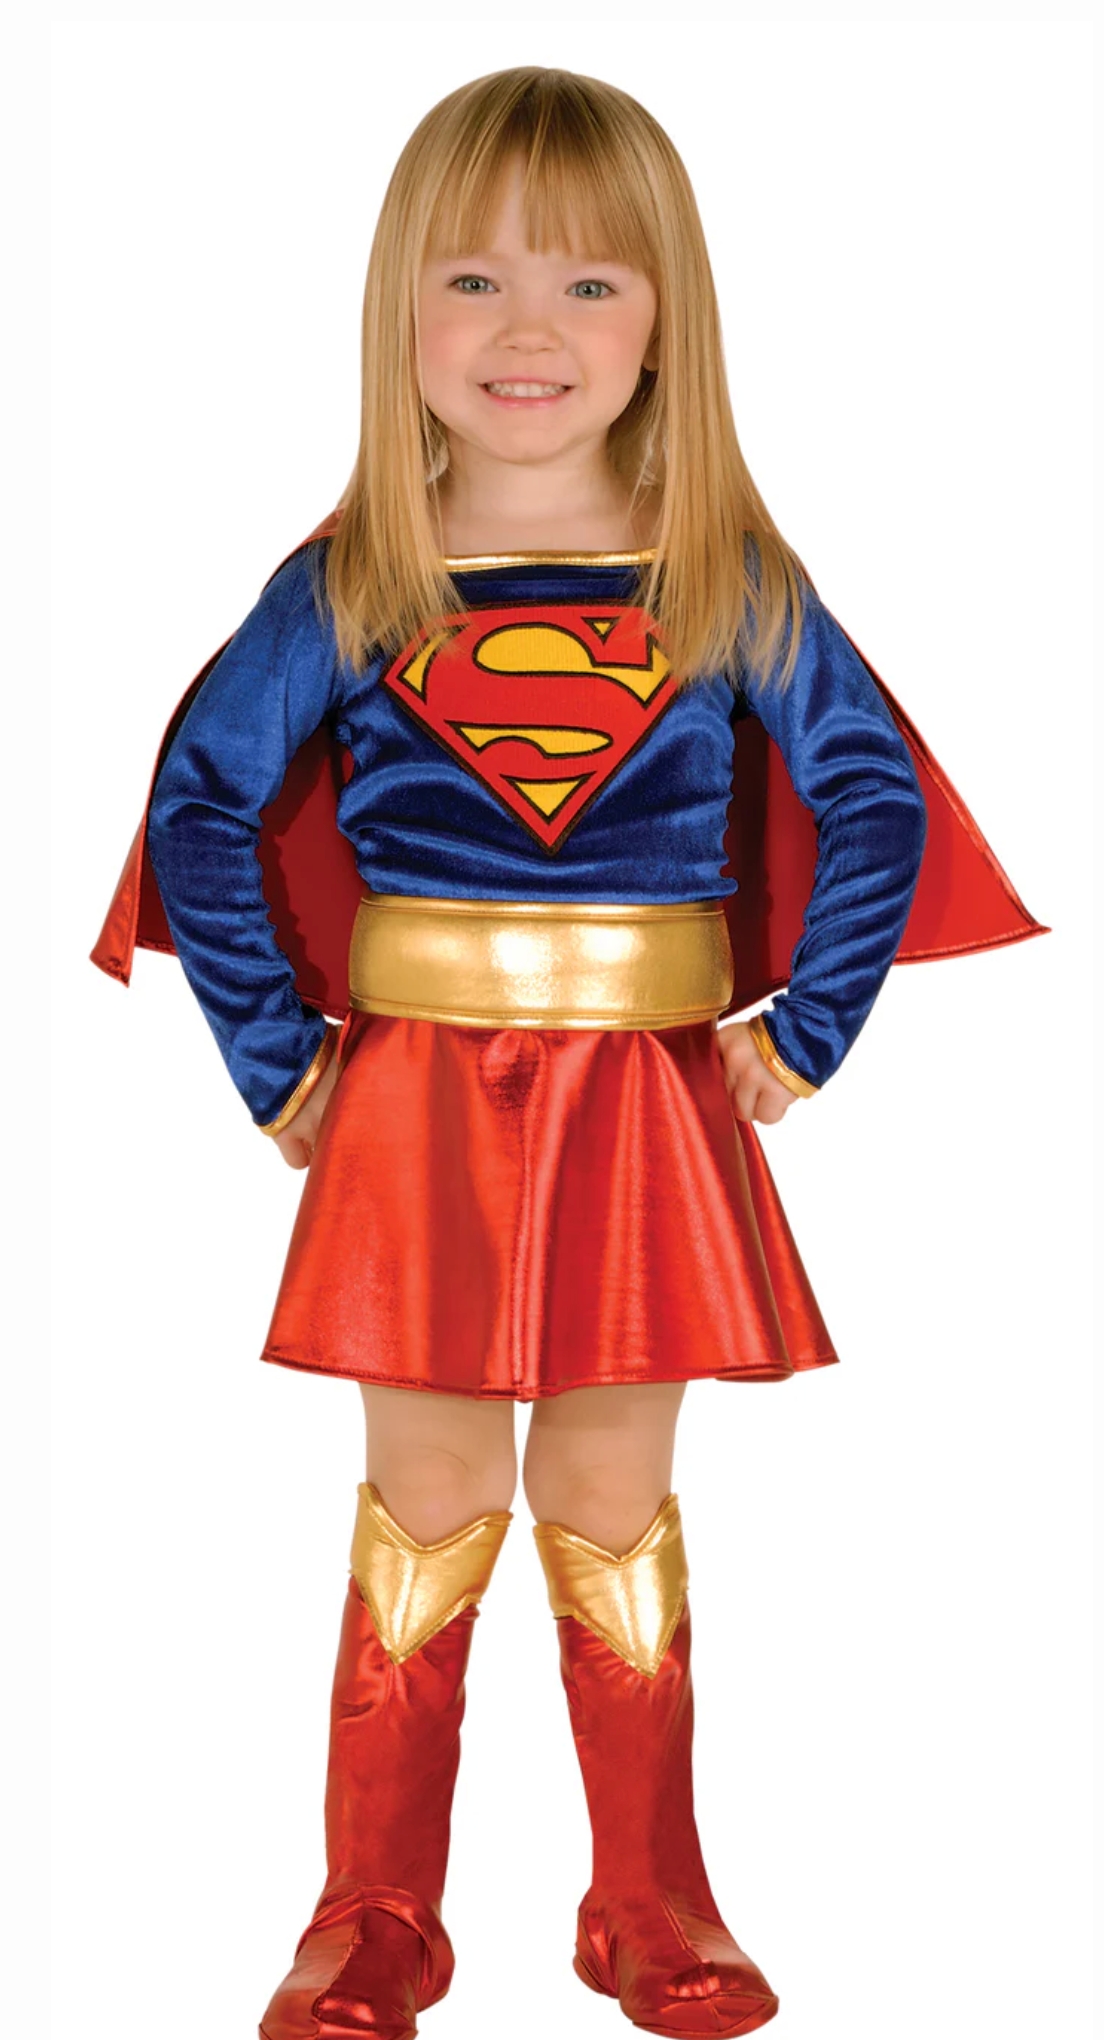 Supergirl Deluxe Toddler Outfit